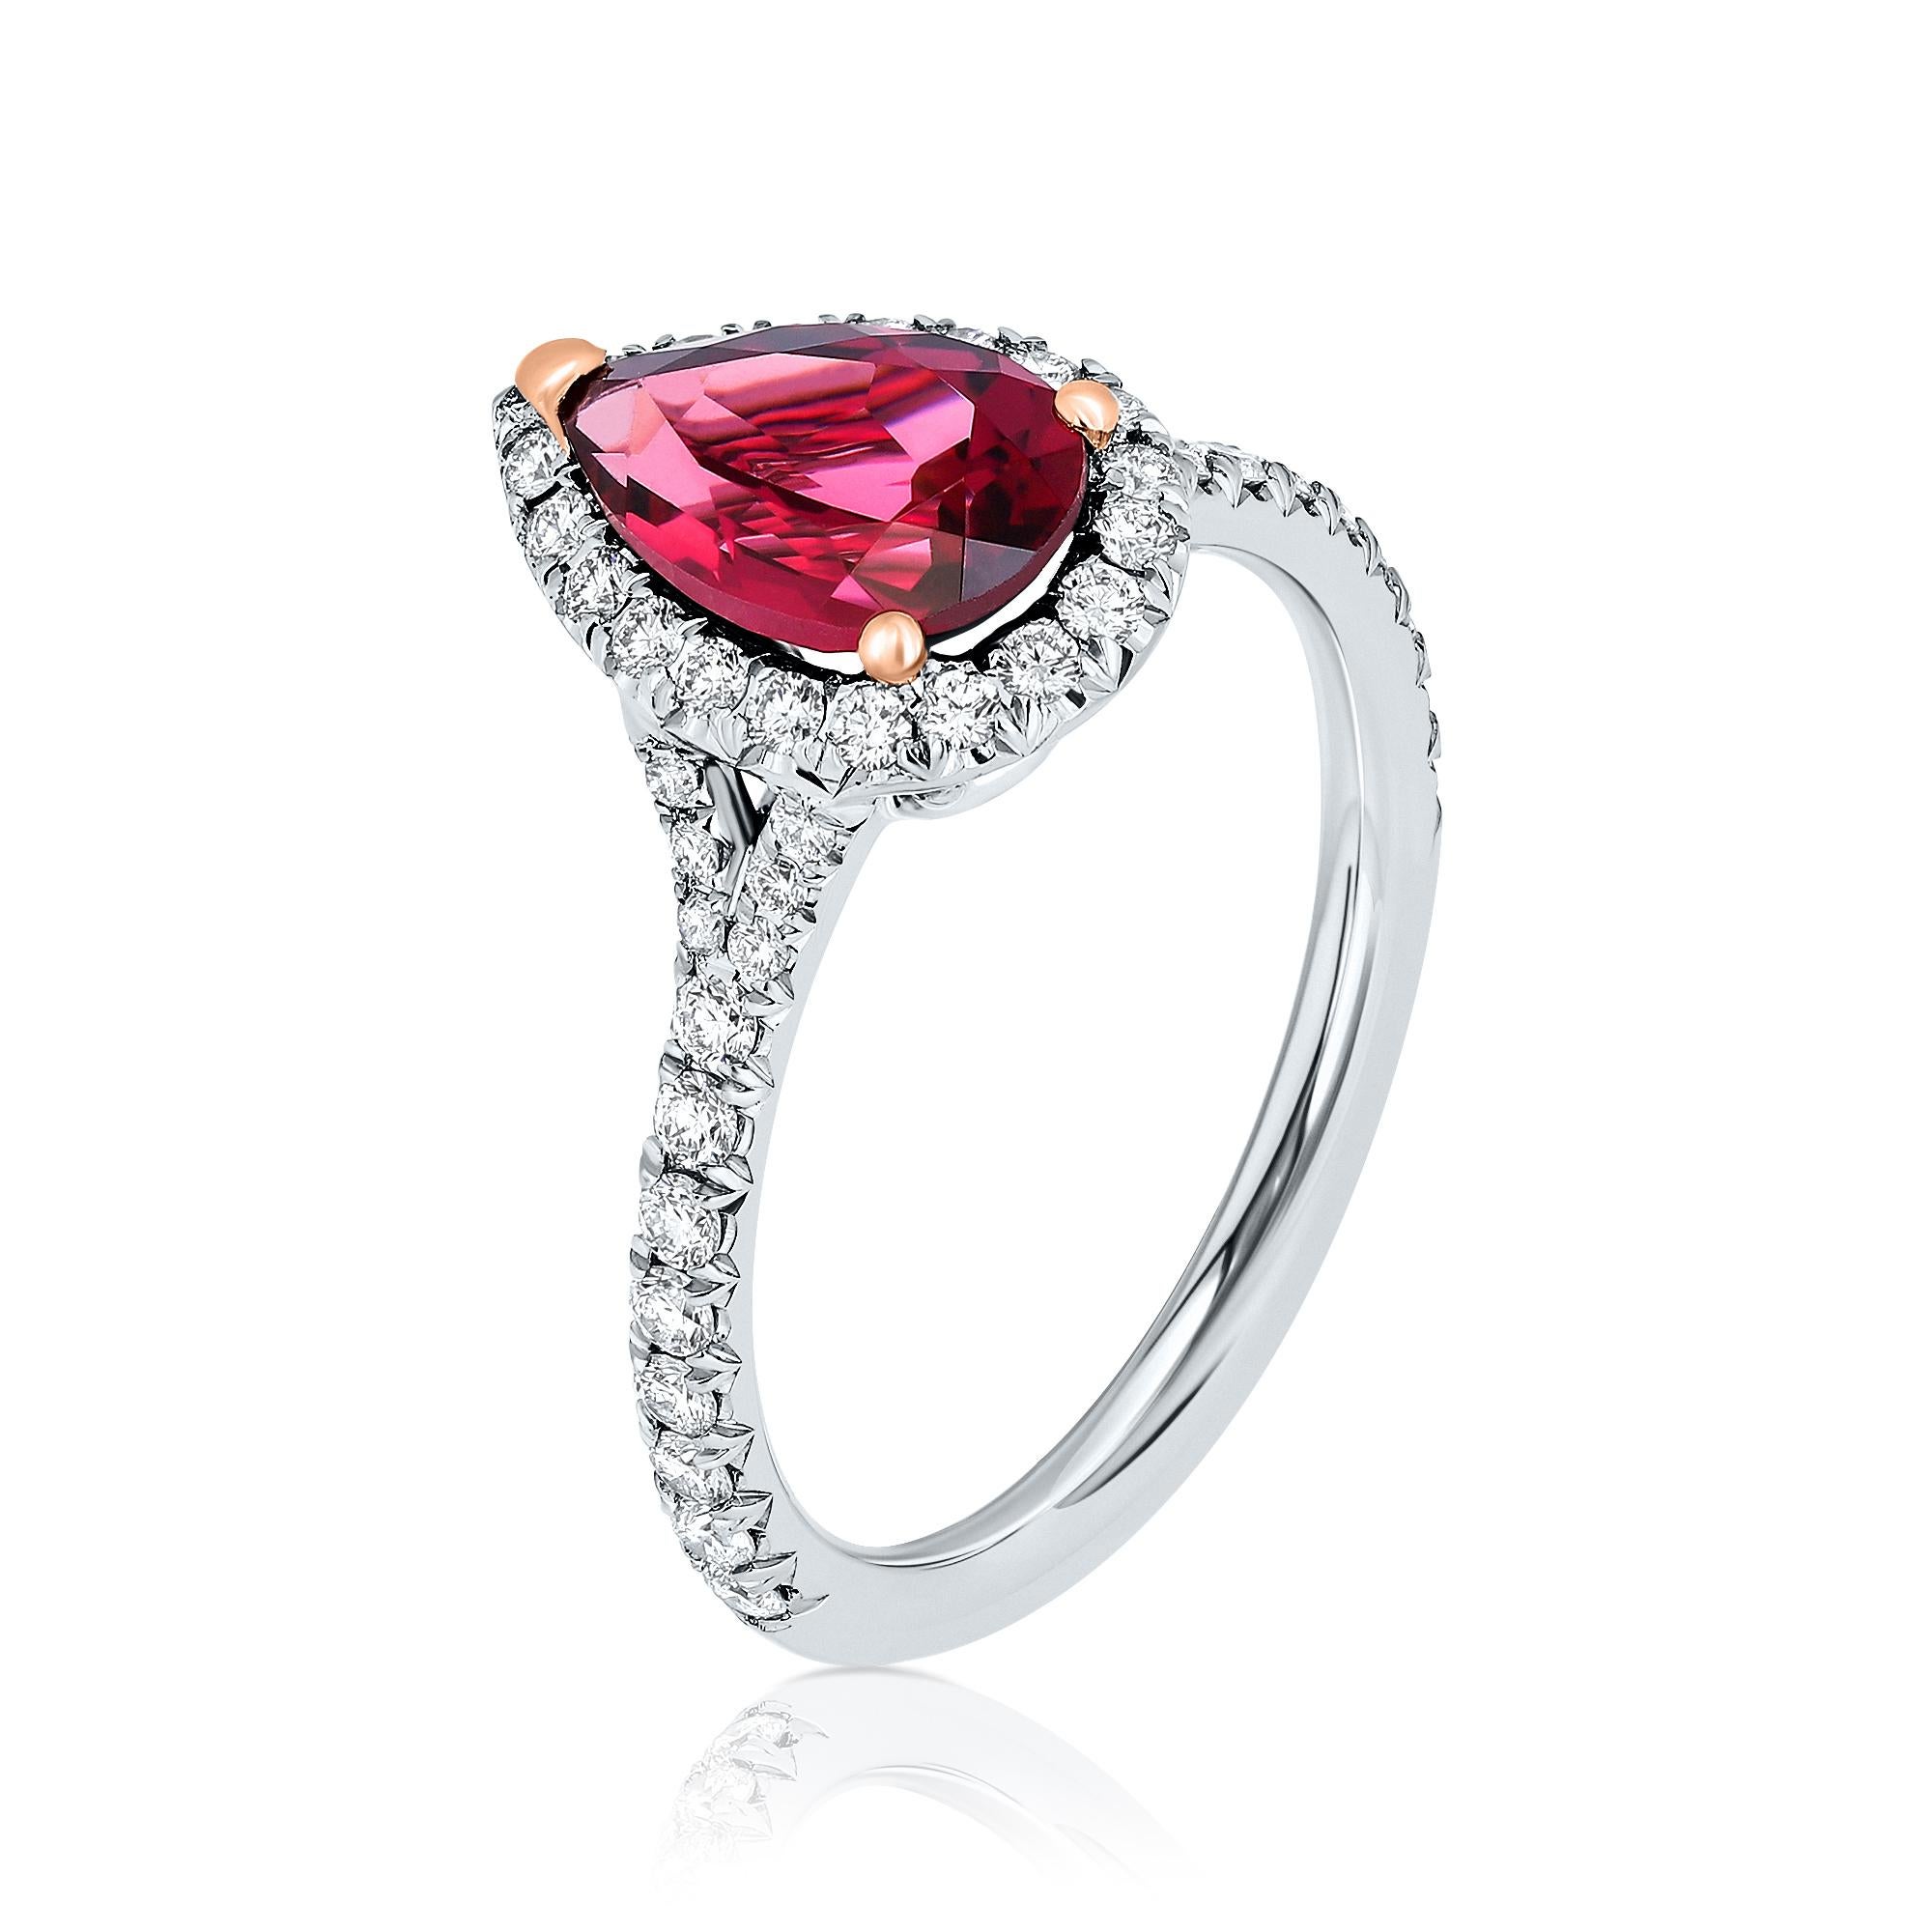 Pear Cut 2.33 Carat Red Pear Tourmaline & Diamond Halo Cocktail Ring, set in Platinum. For Sale